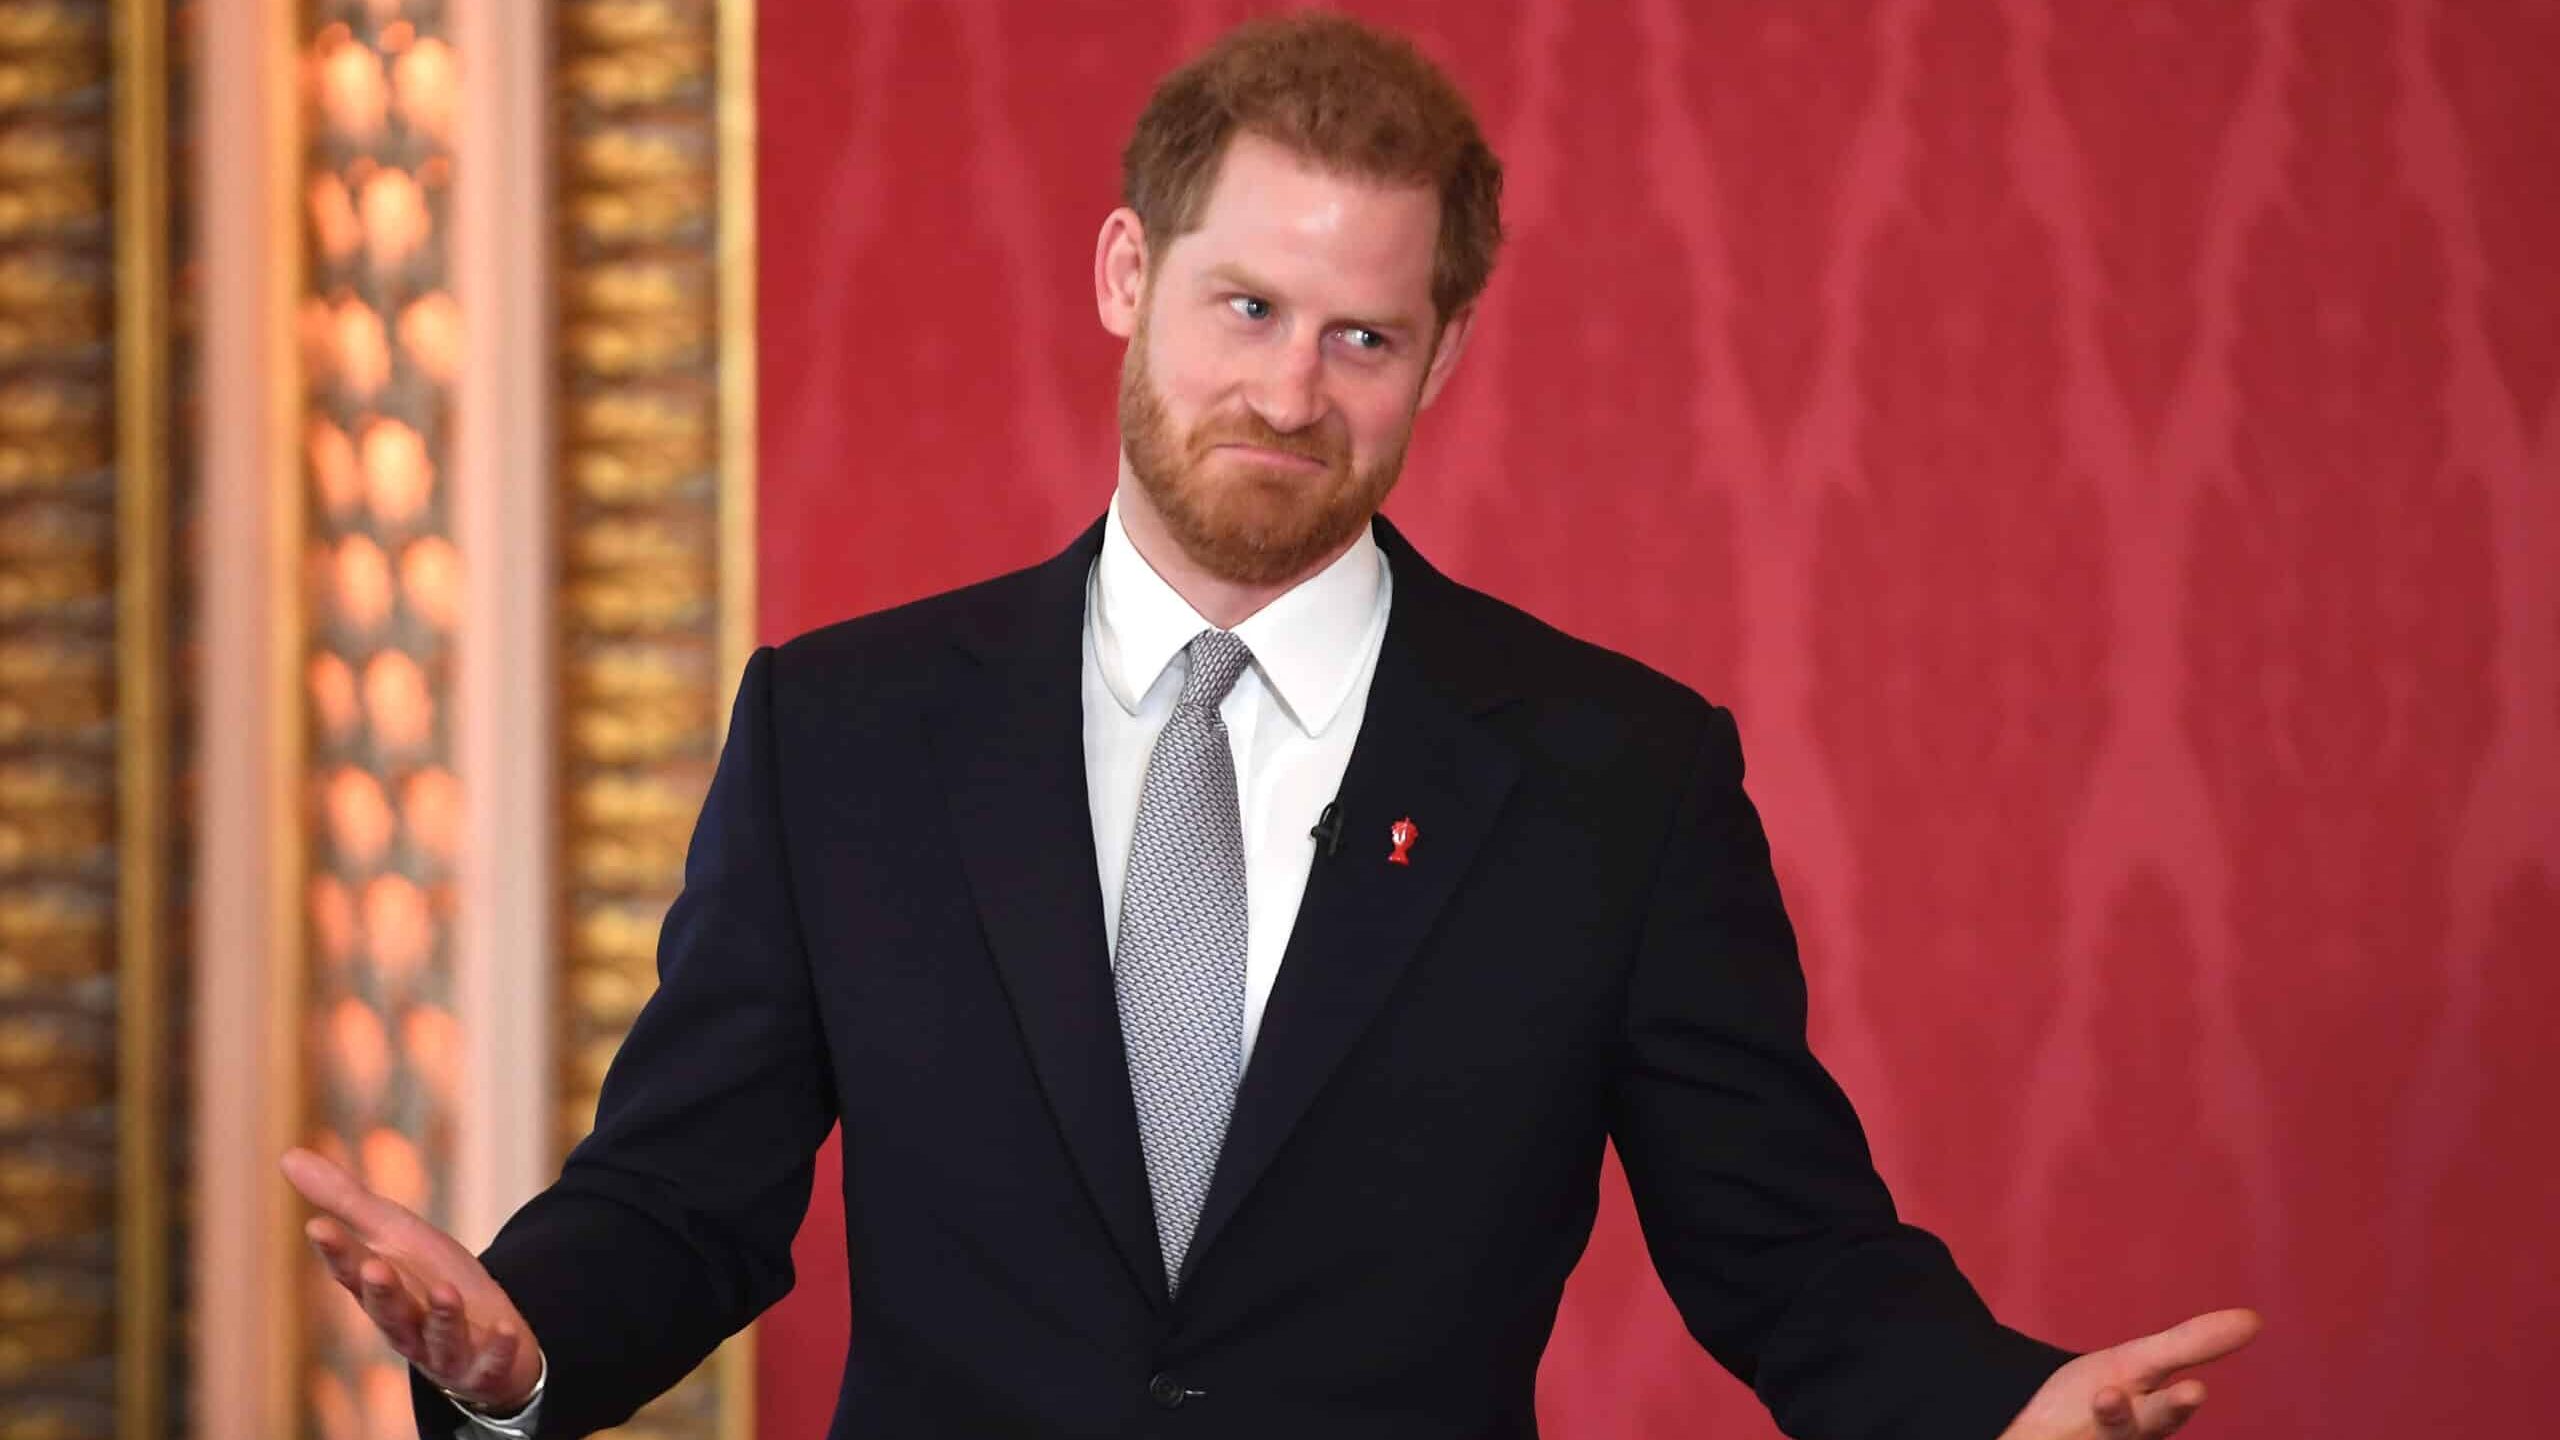 Prince Harry, Duke of Sussex, the Patron of the Rugby Football League hosts the Rugby League World Cup 2021 draws at Buckingham Palace on January 16, 2020 in London, England. The Rugby League World Cup 2021 will take place from October 23rd through to November 27th, 2021 in 17 cities across England.